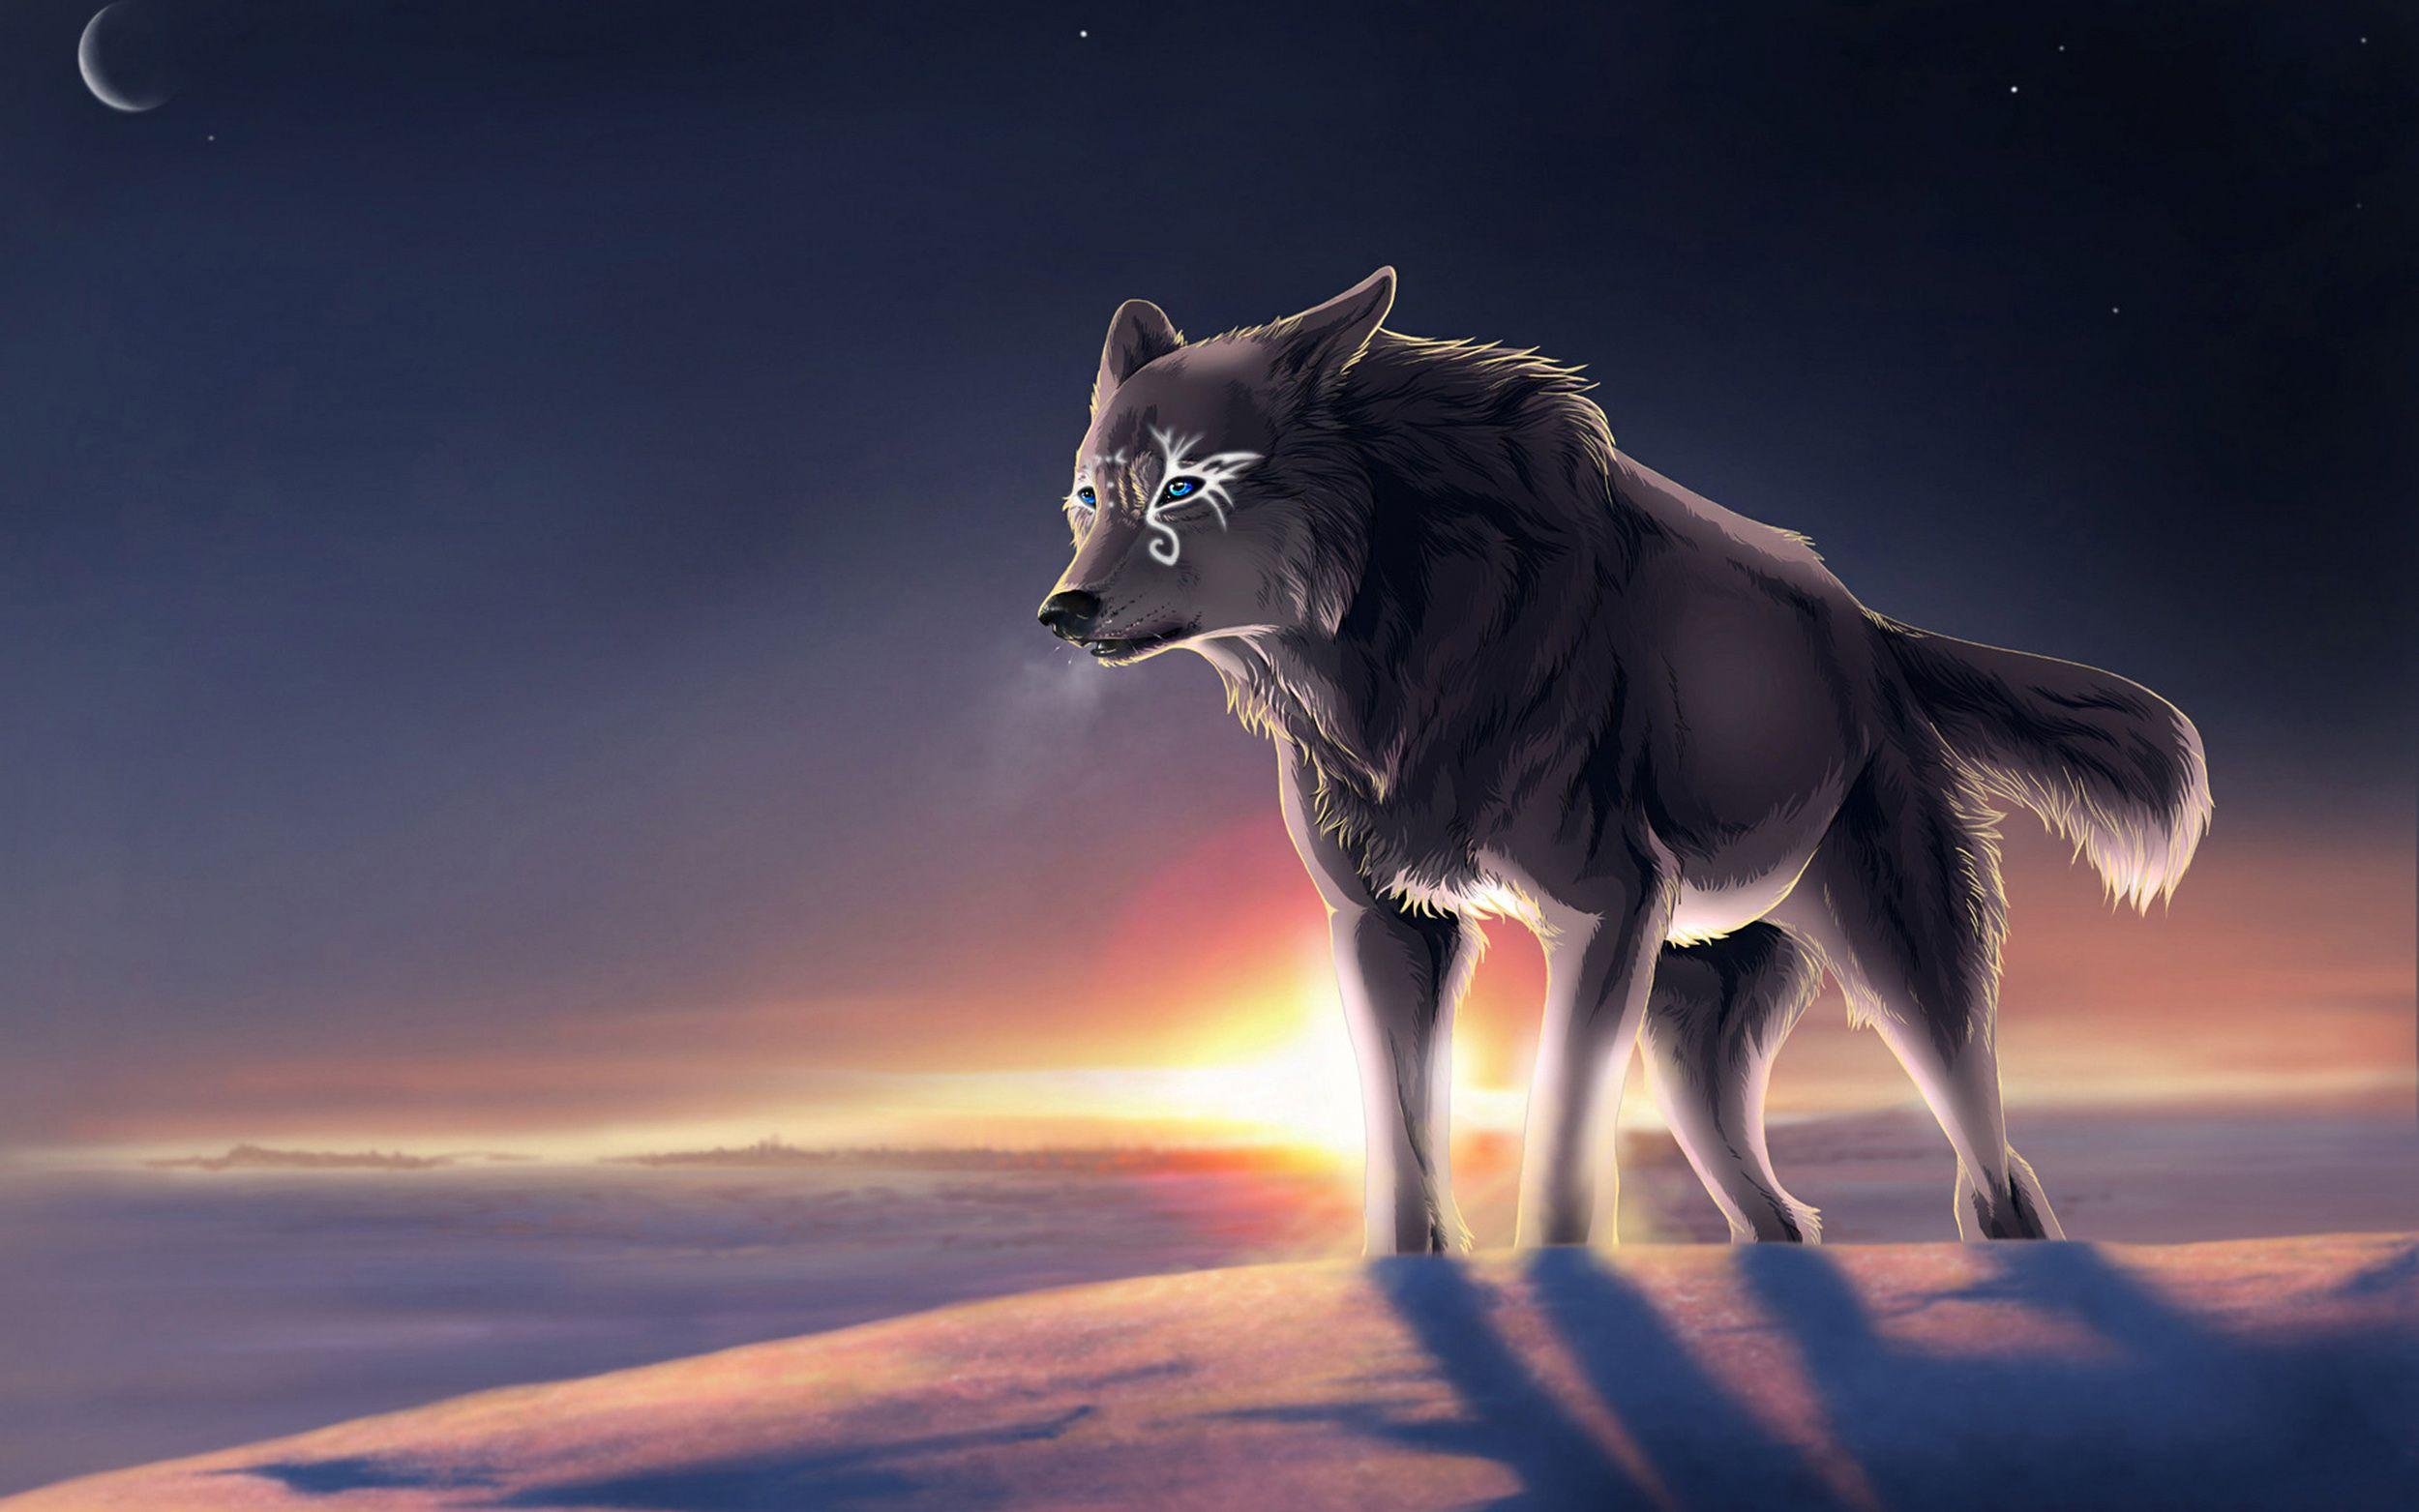 Cool Anime Wolf Wallpaper, Live Anime Wolf Picture (42), PC